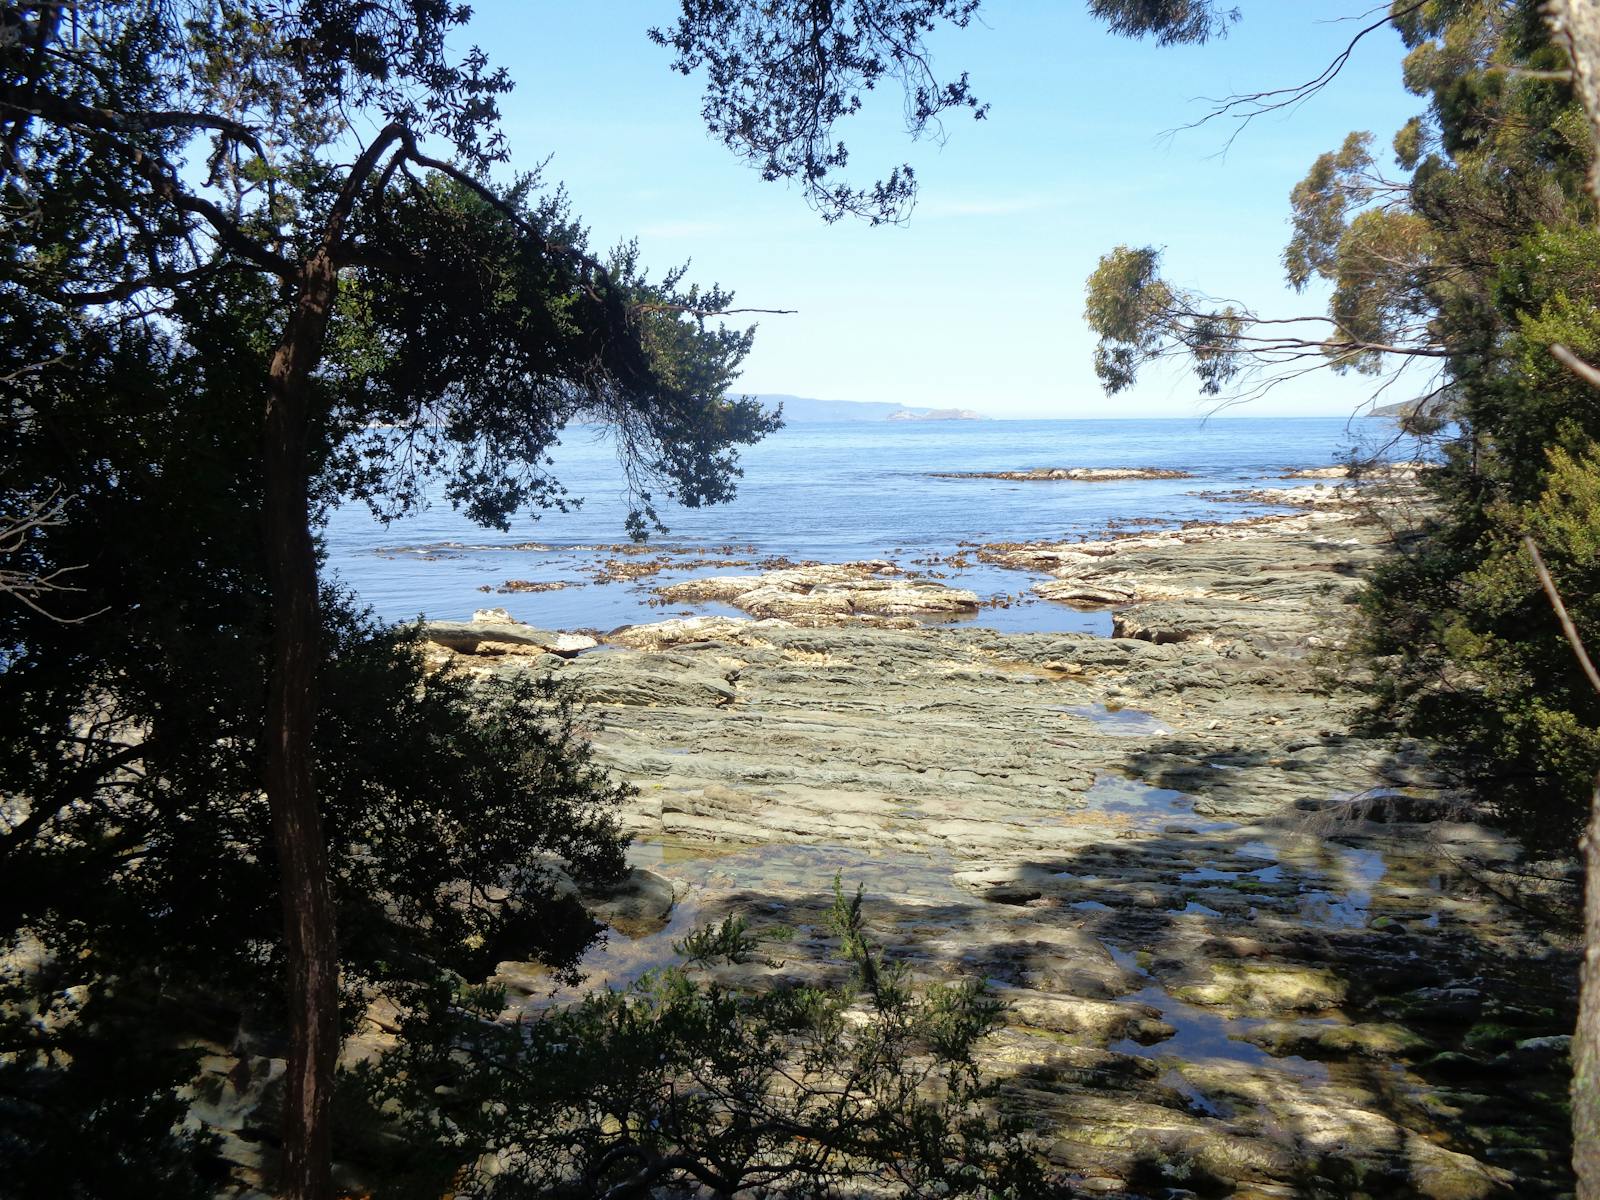 Little Deadman's Bay on The South Coast Track - a welcome sight after crossing The Ironbound Range